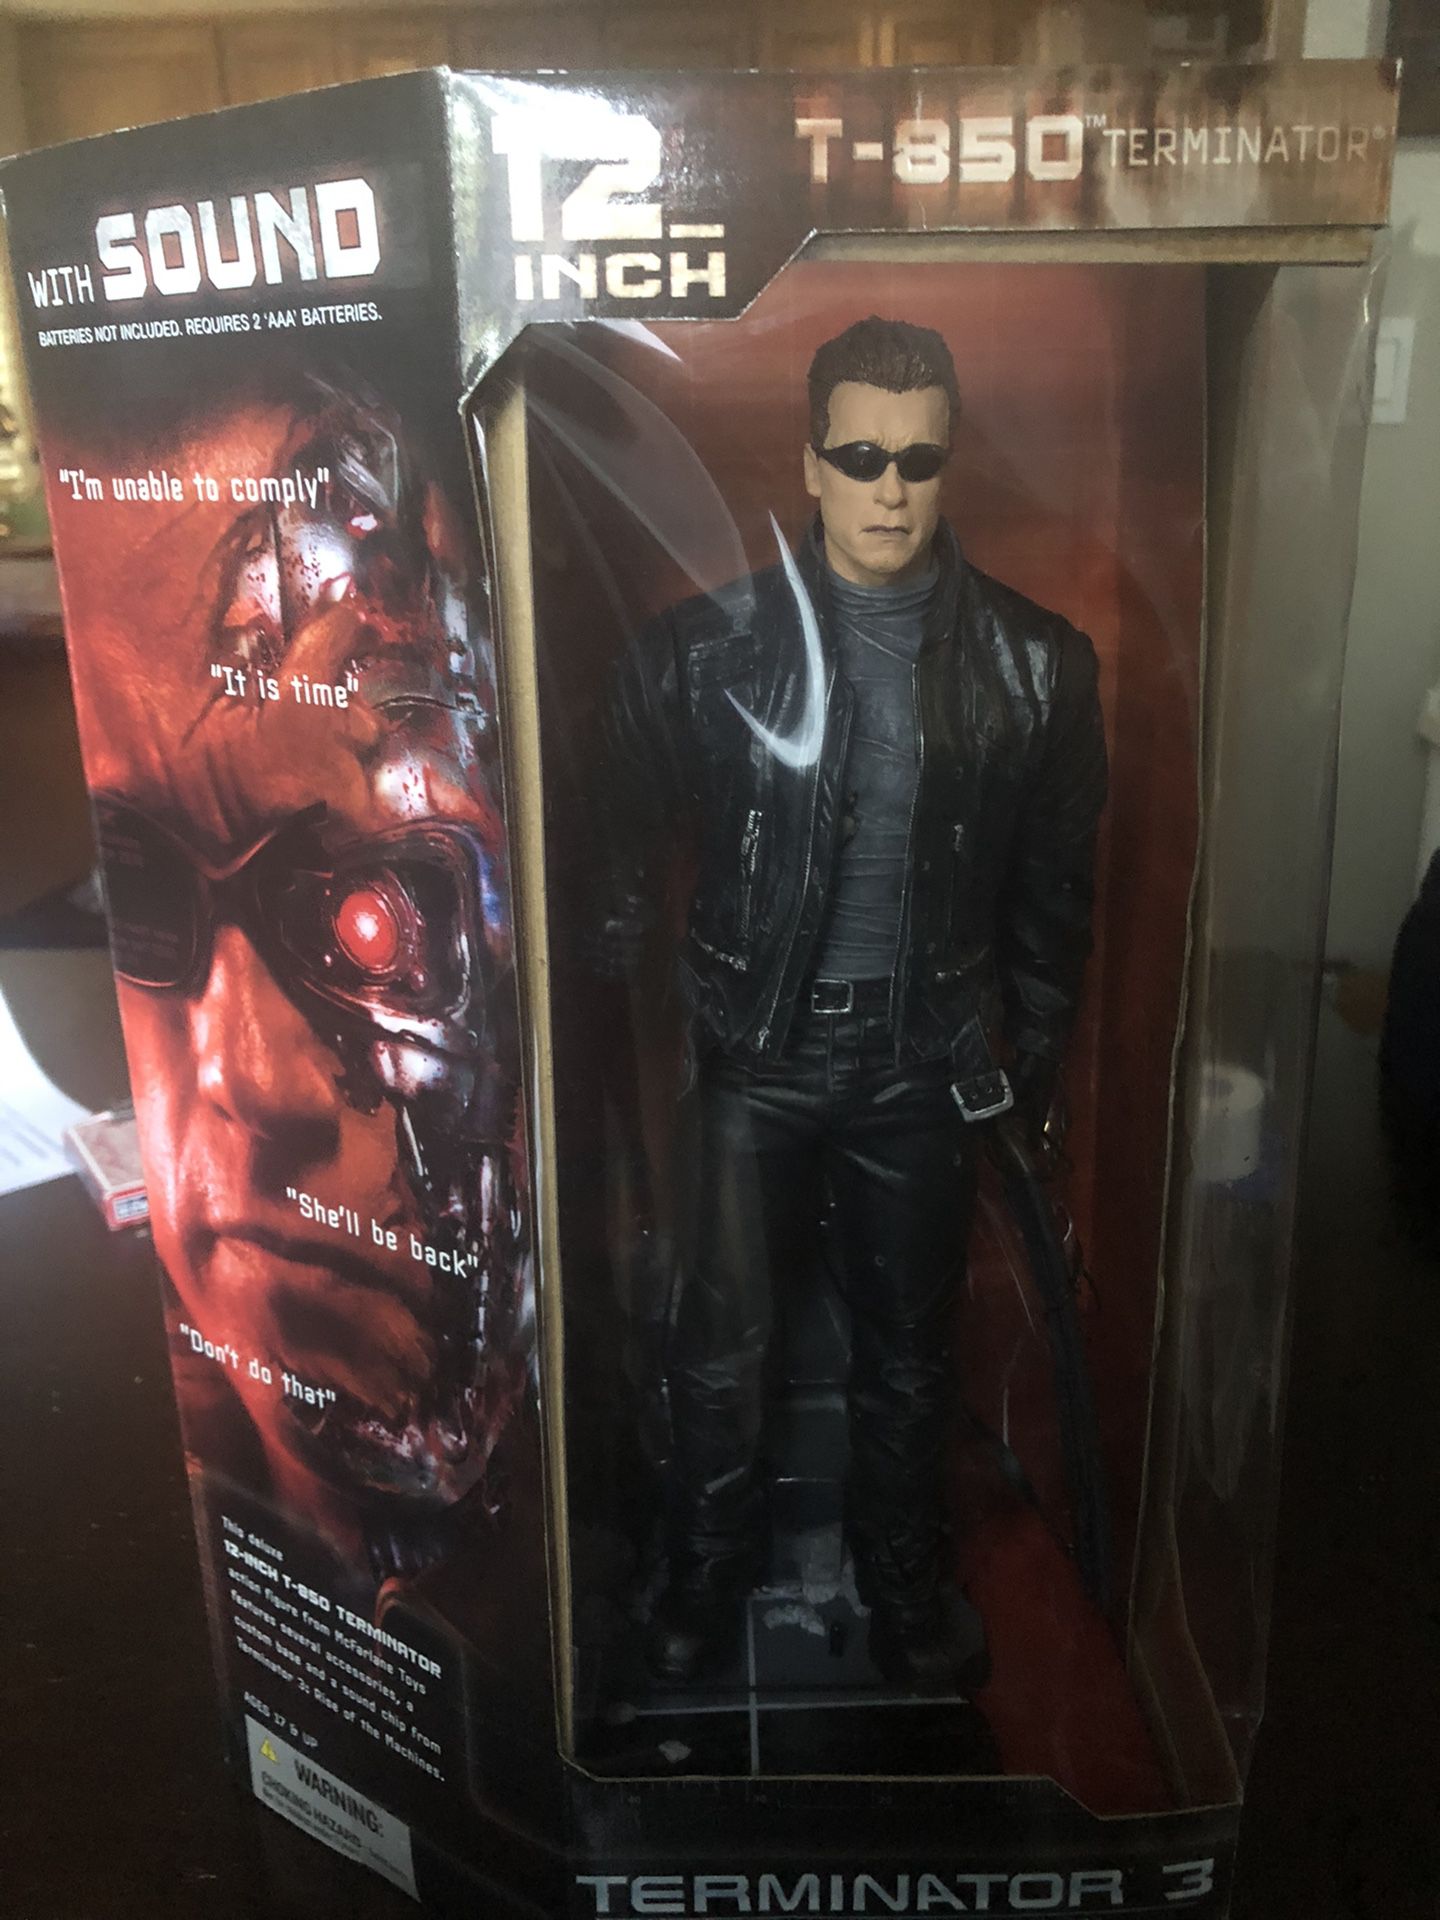 McFarlane Toys Terminator 3 12 inch T-850 Electronic Action Figure 2003 New